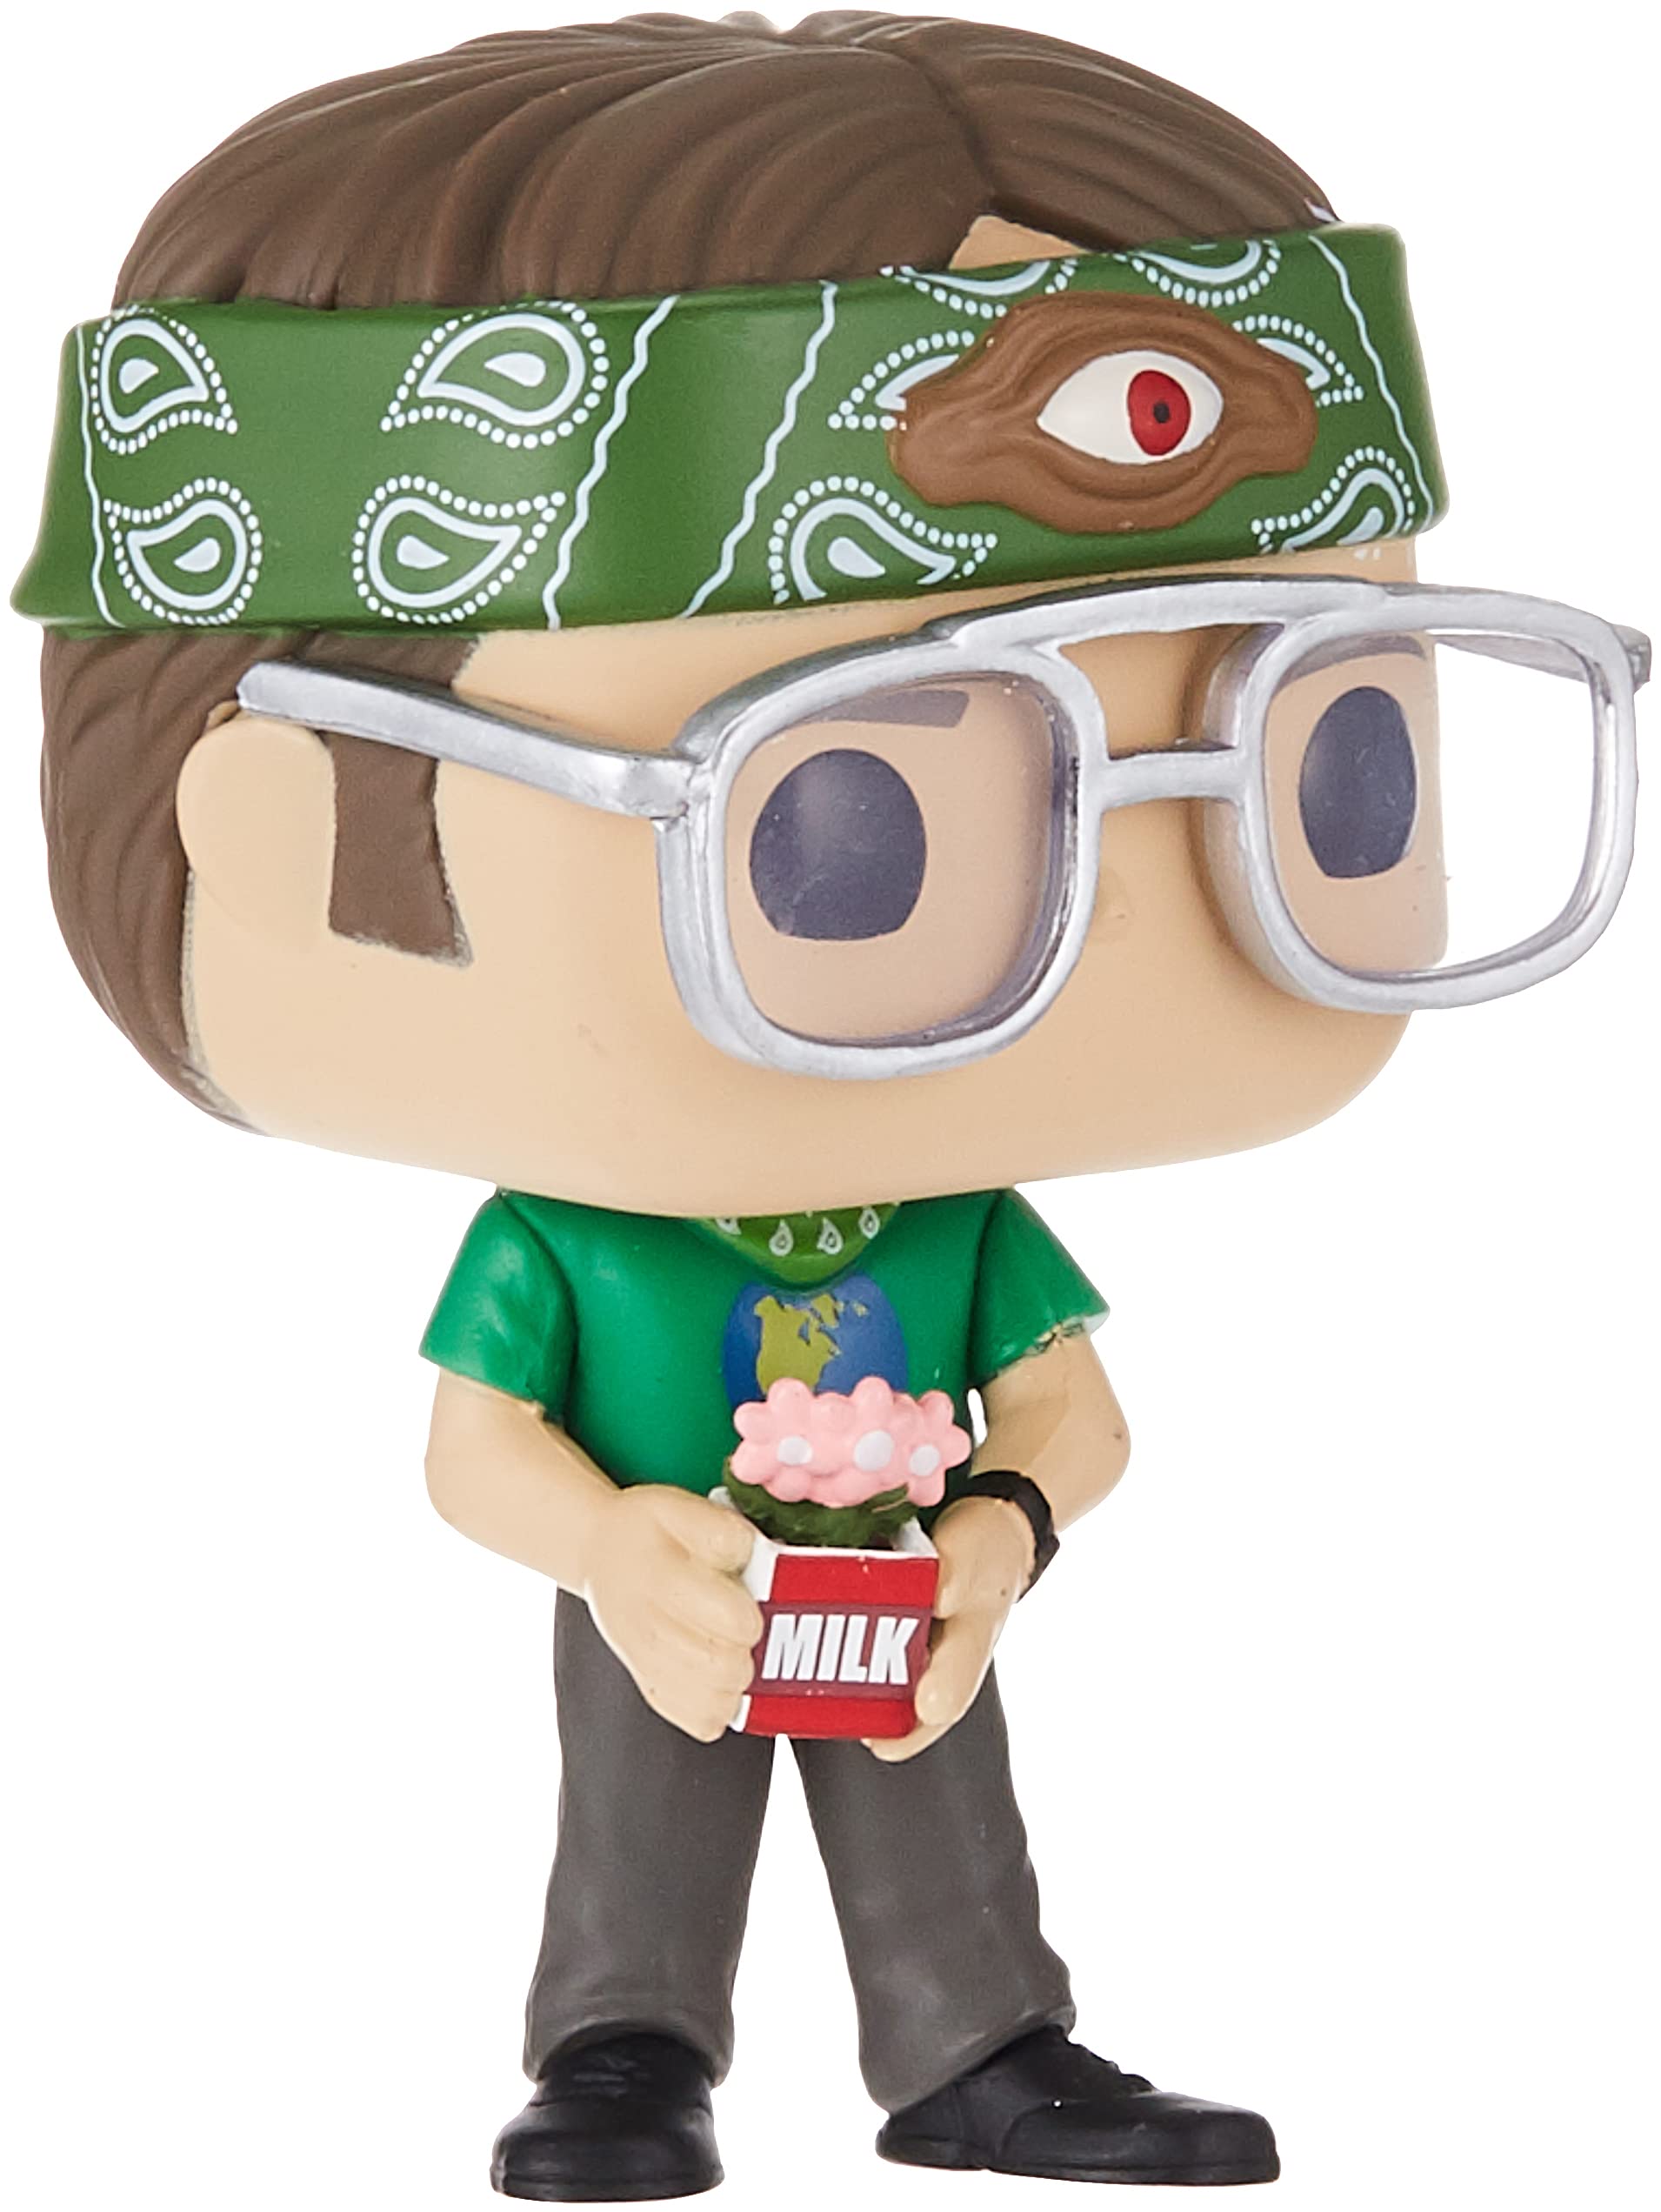 POP 2020 ECCC Shared Exclusive 938 Dwight as Recyclops